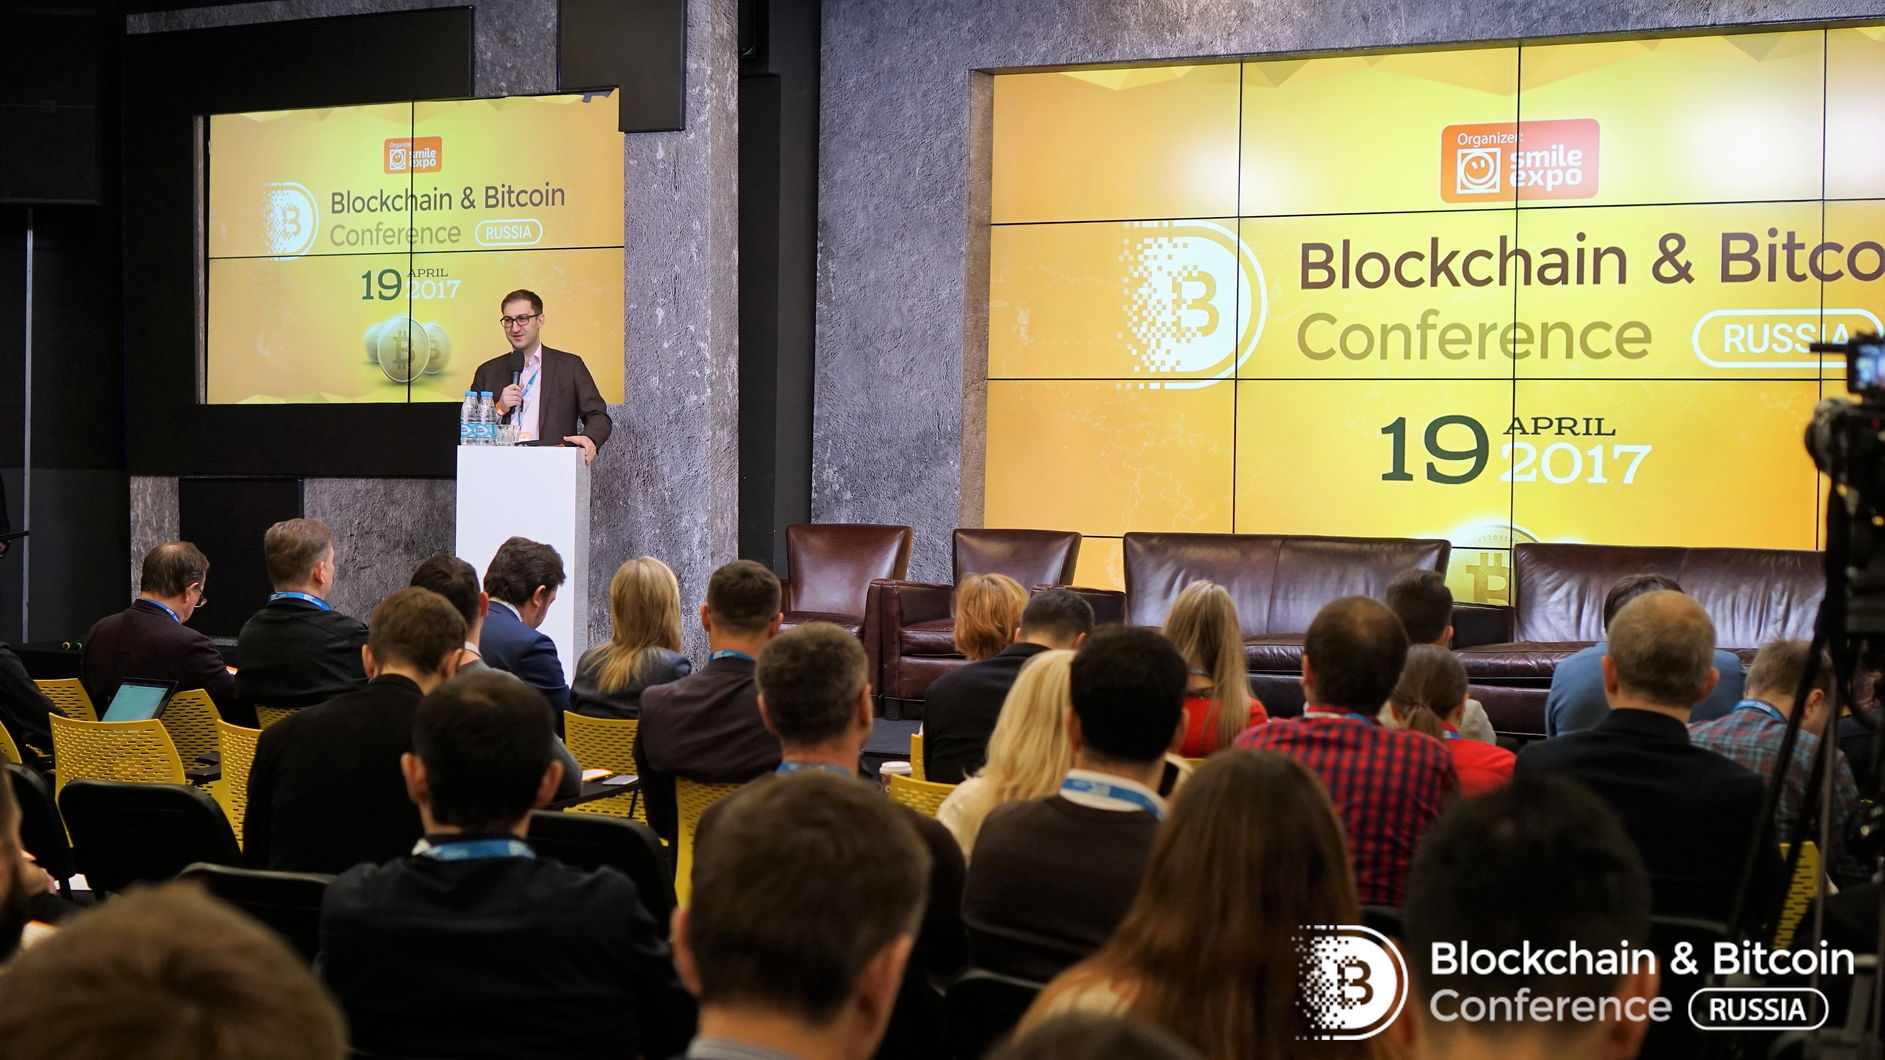 Blockchain World Events to expand horizons: +20 new cities in 2018